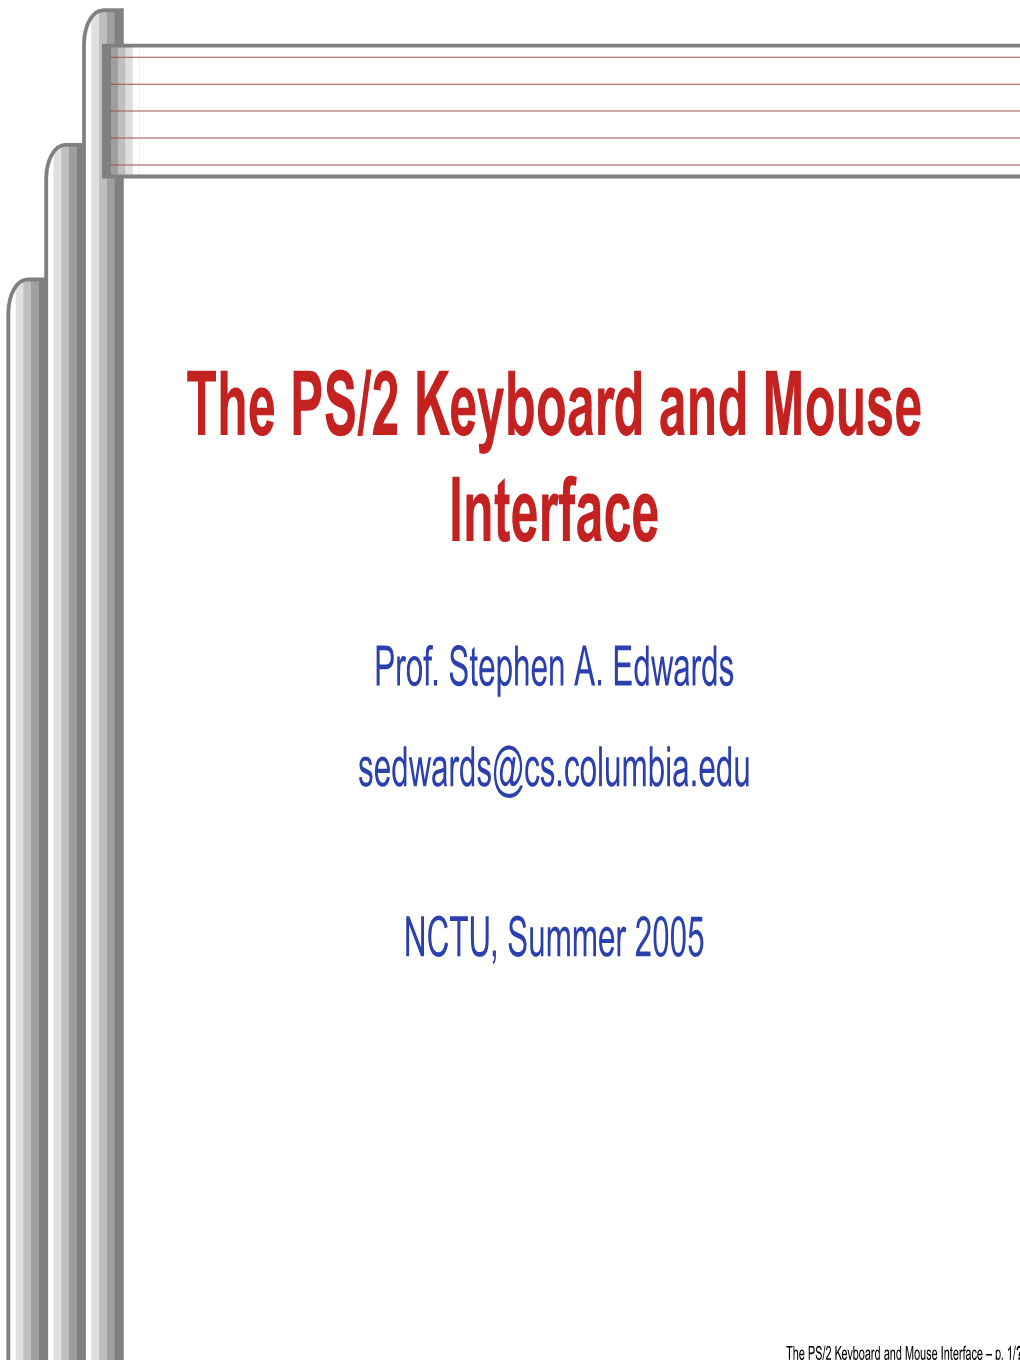 The PS/2 Keyboard and Mouse Interface